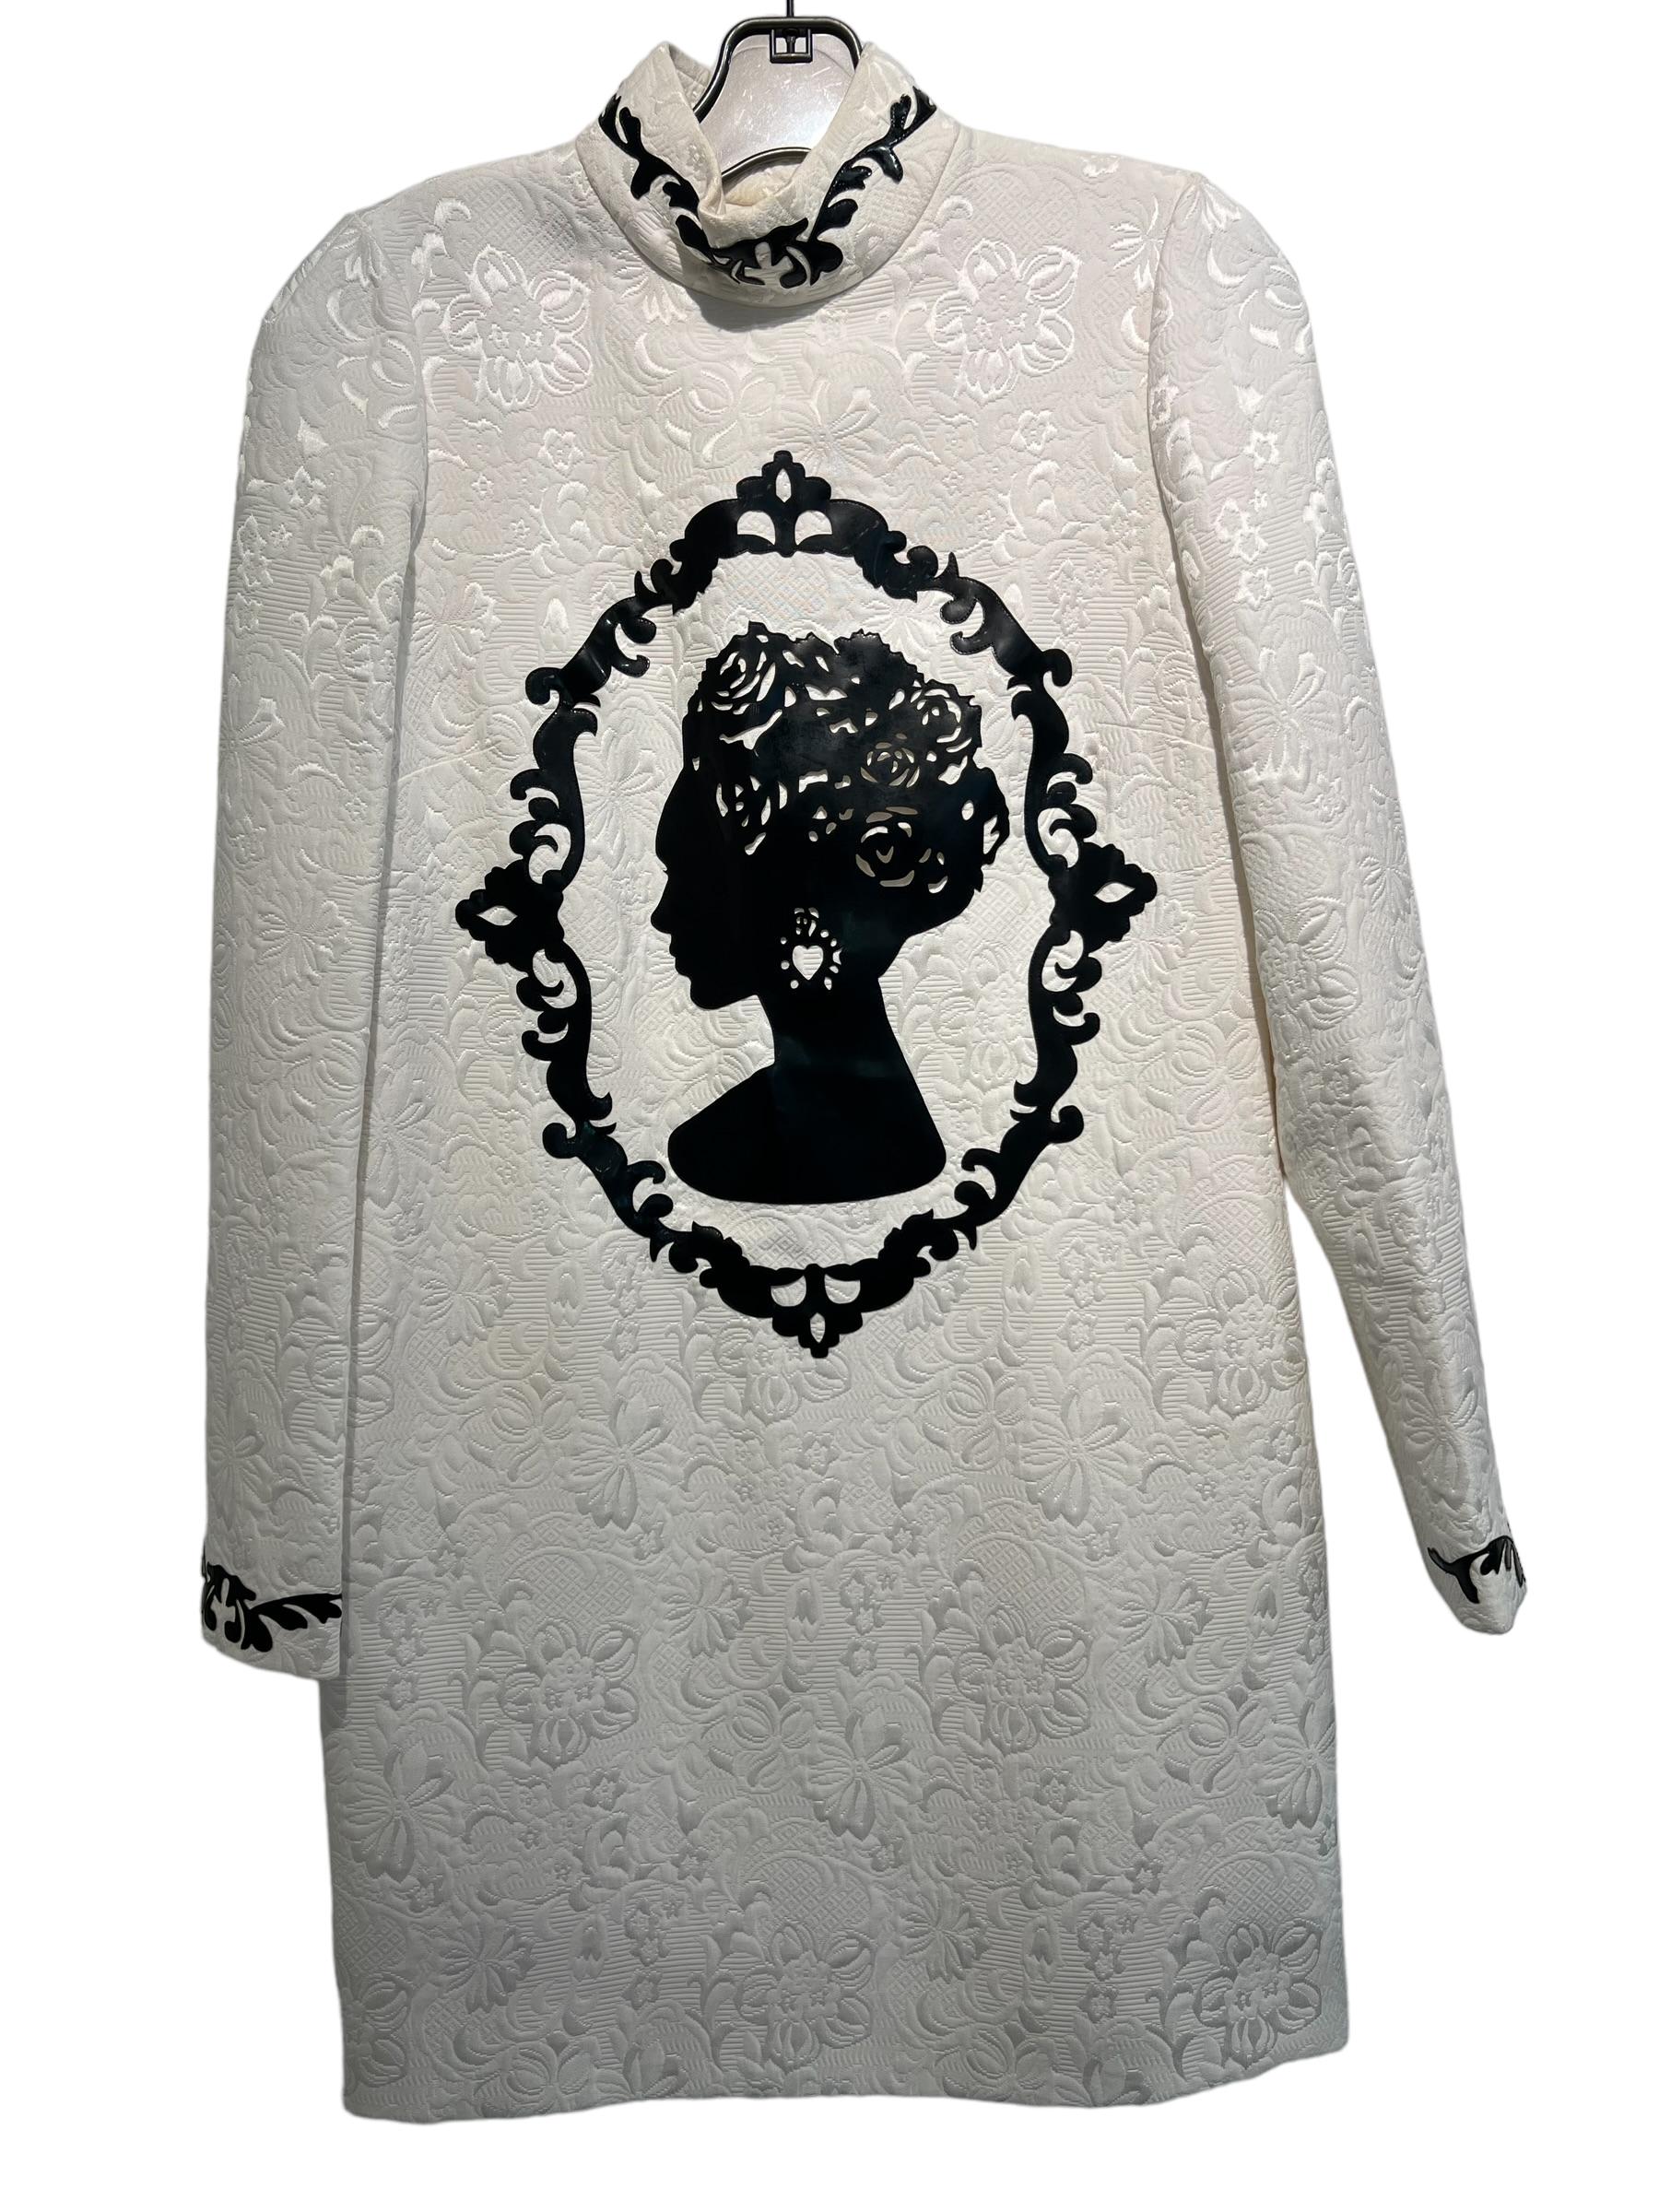 Dolce & Gabbana Women´s Embroidered Off-White Long Sleeve Dress with Black Vinyl Appliqué at Back and Collar. Size 42